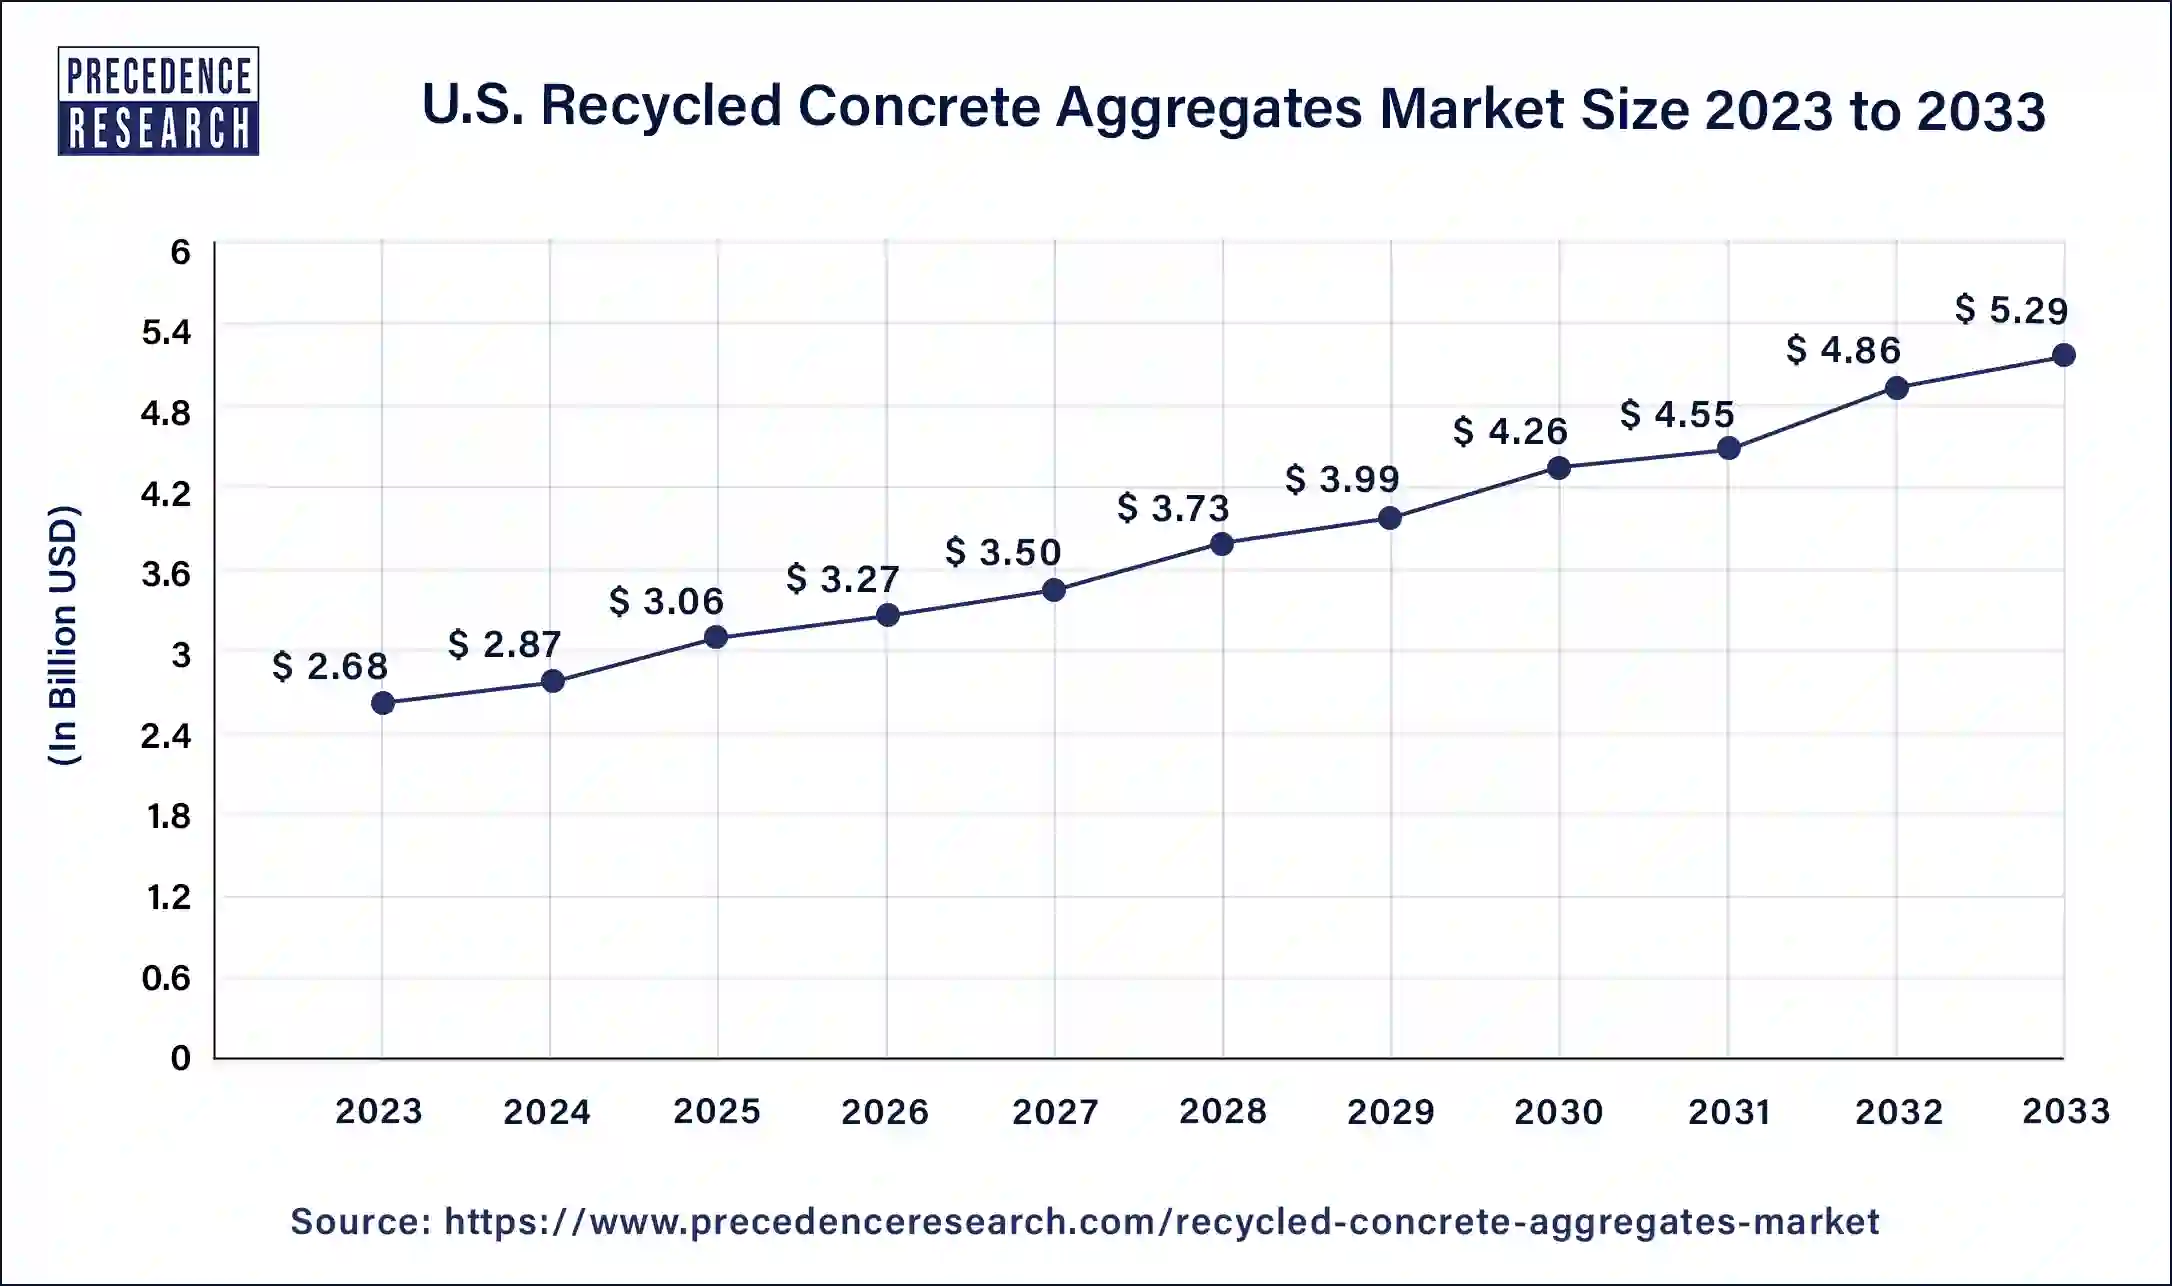 U.S. Recycled Concrete Aggregates Market Size 2024 to 2033